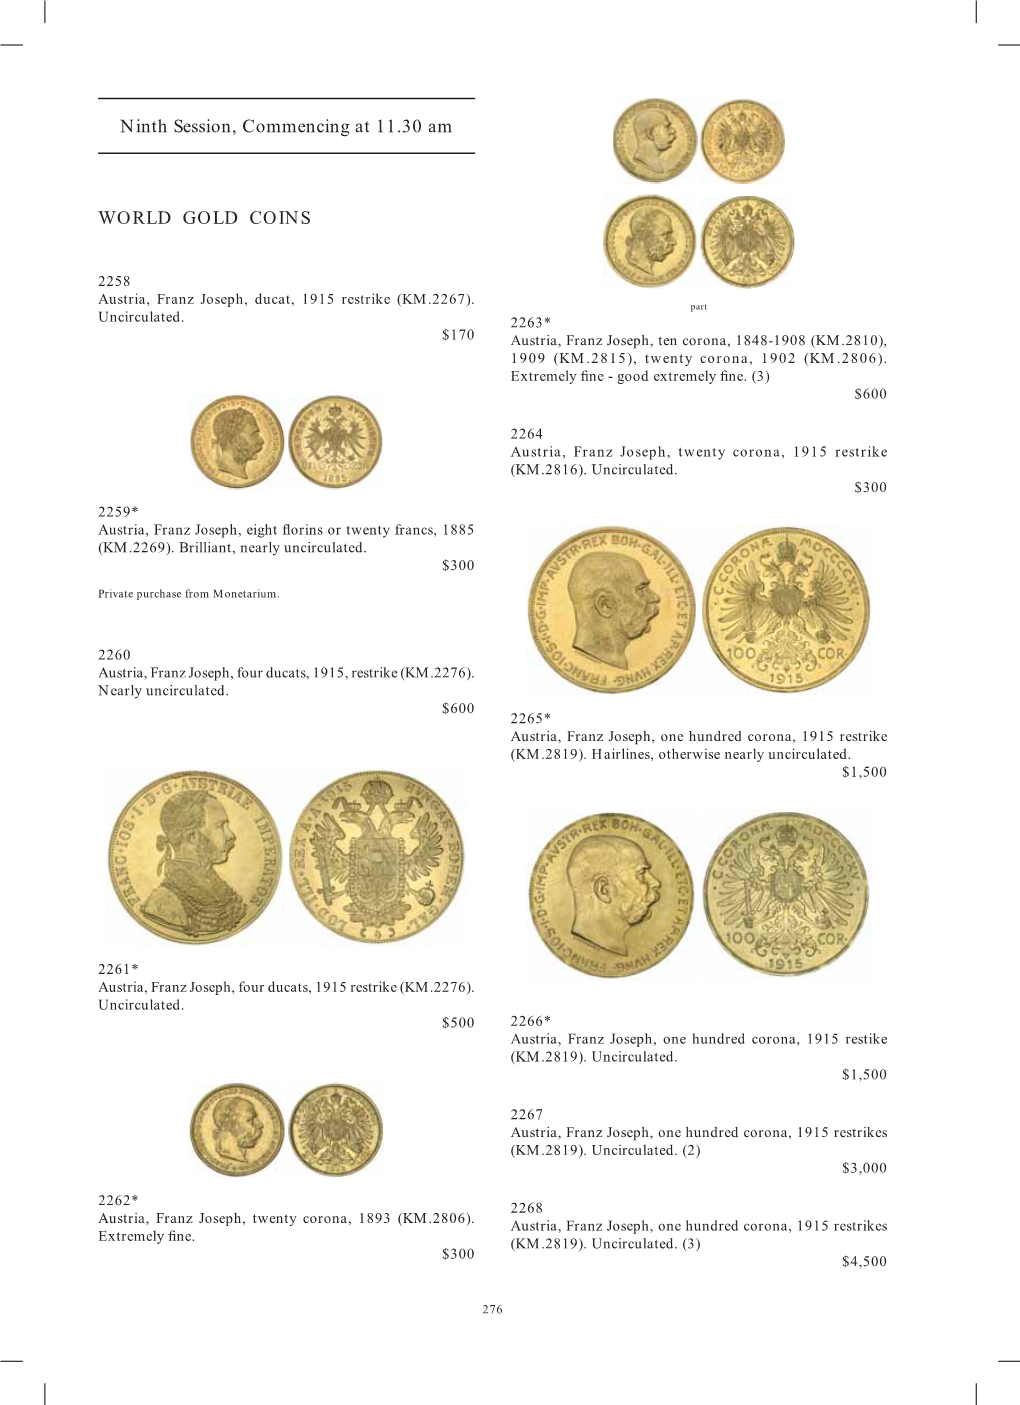 Ninth Session, Commencing at 11.30 Am WORLD GOLD COINS